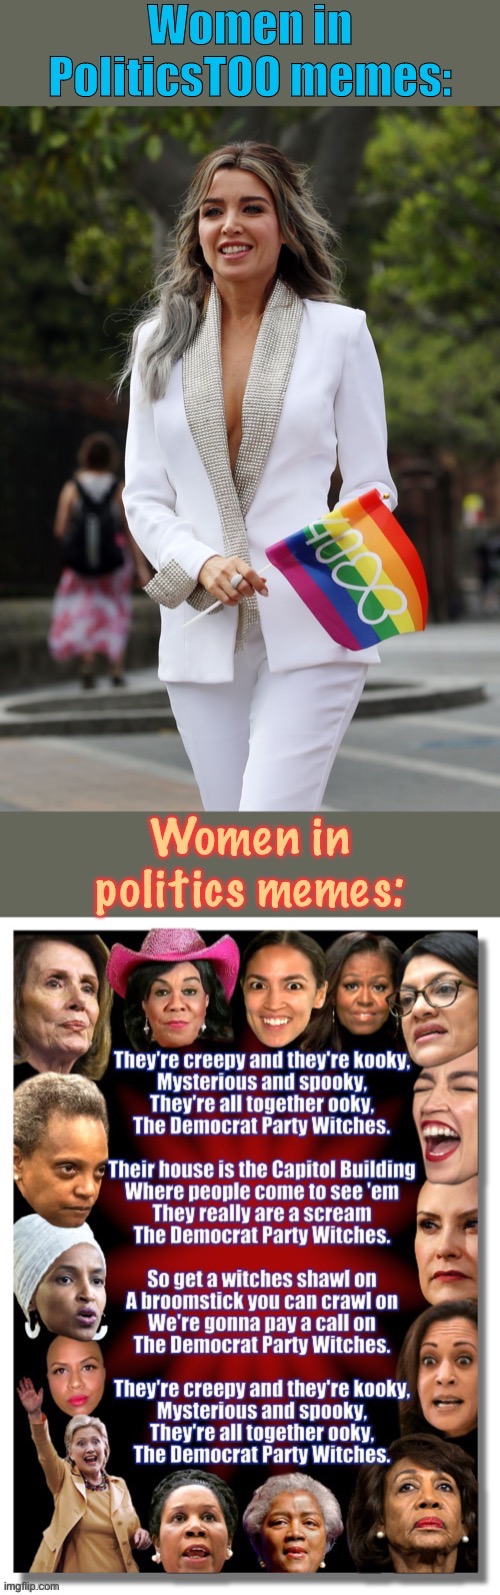 Things that make you go hmmm | image tagged in sexism,politics,memes about memeing,memes about memes,sexist,misogyny | made w/ Imgflip meme maker